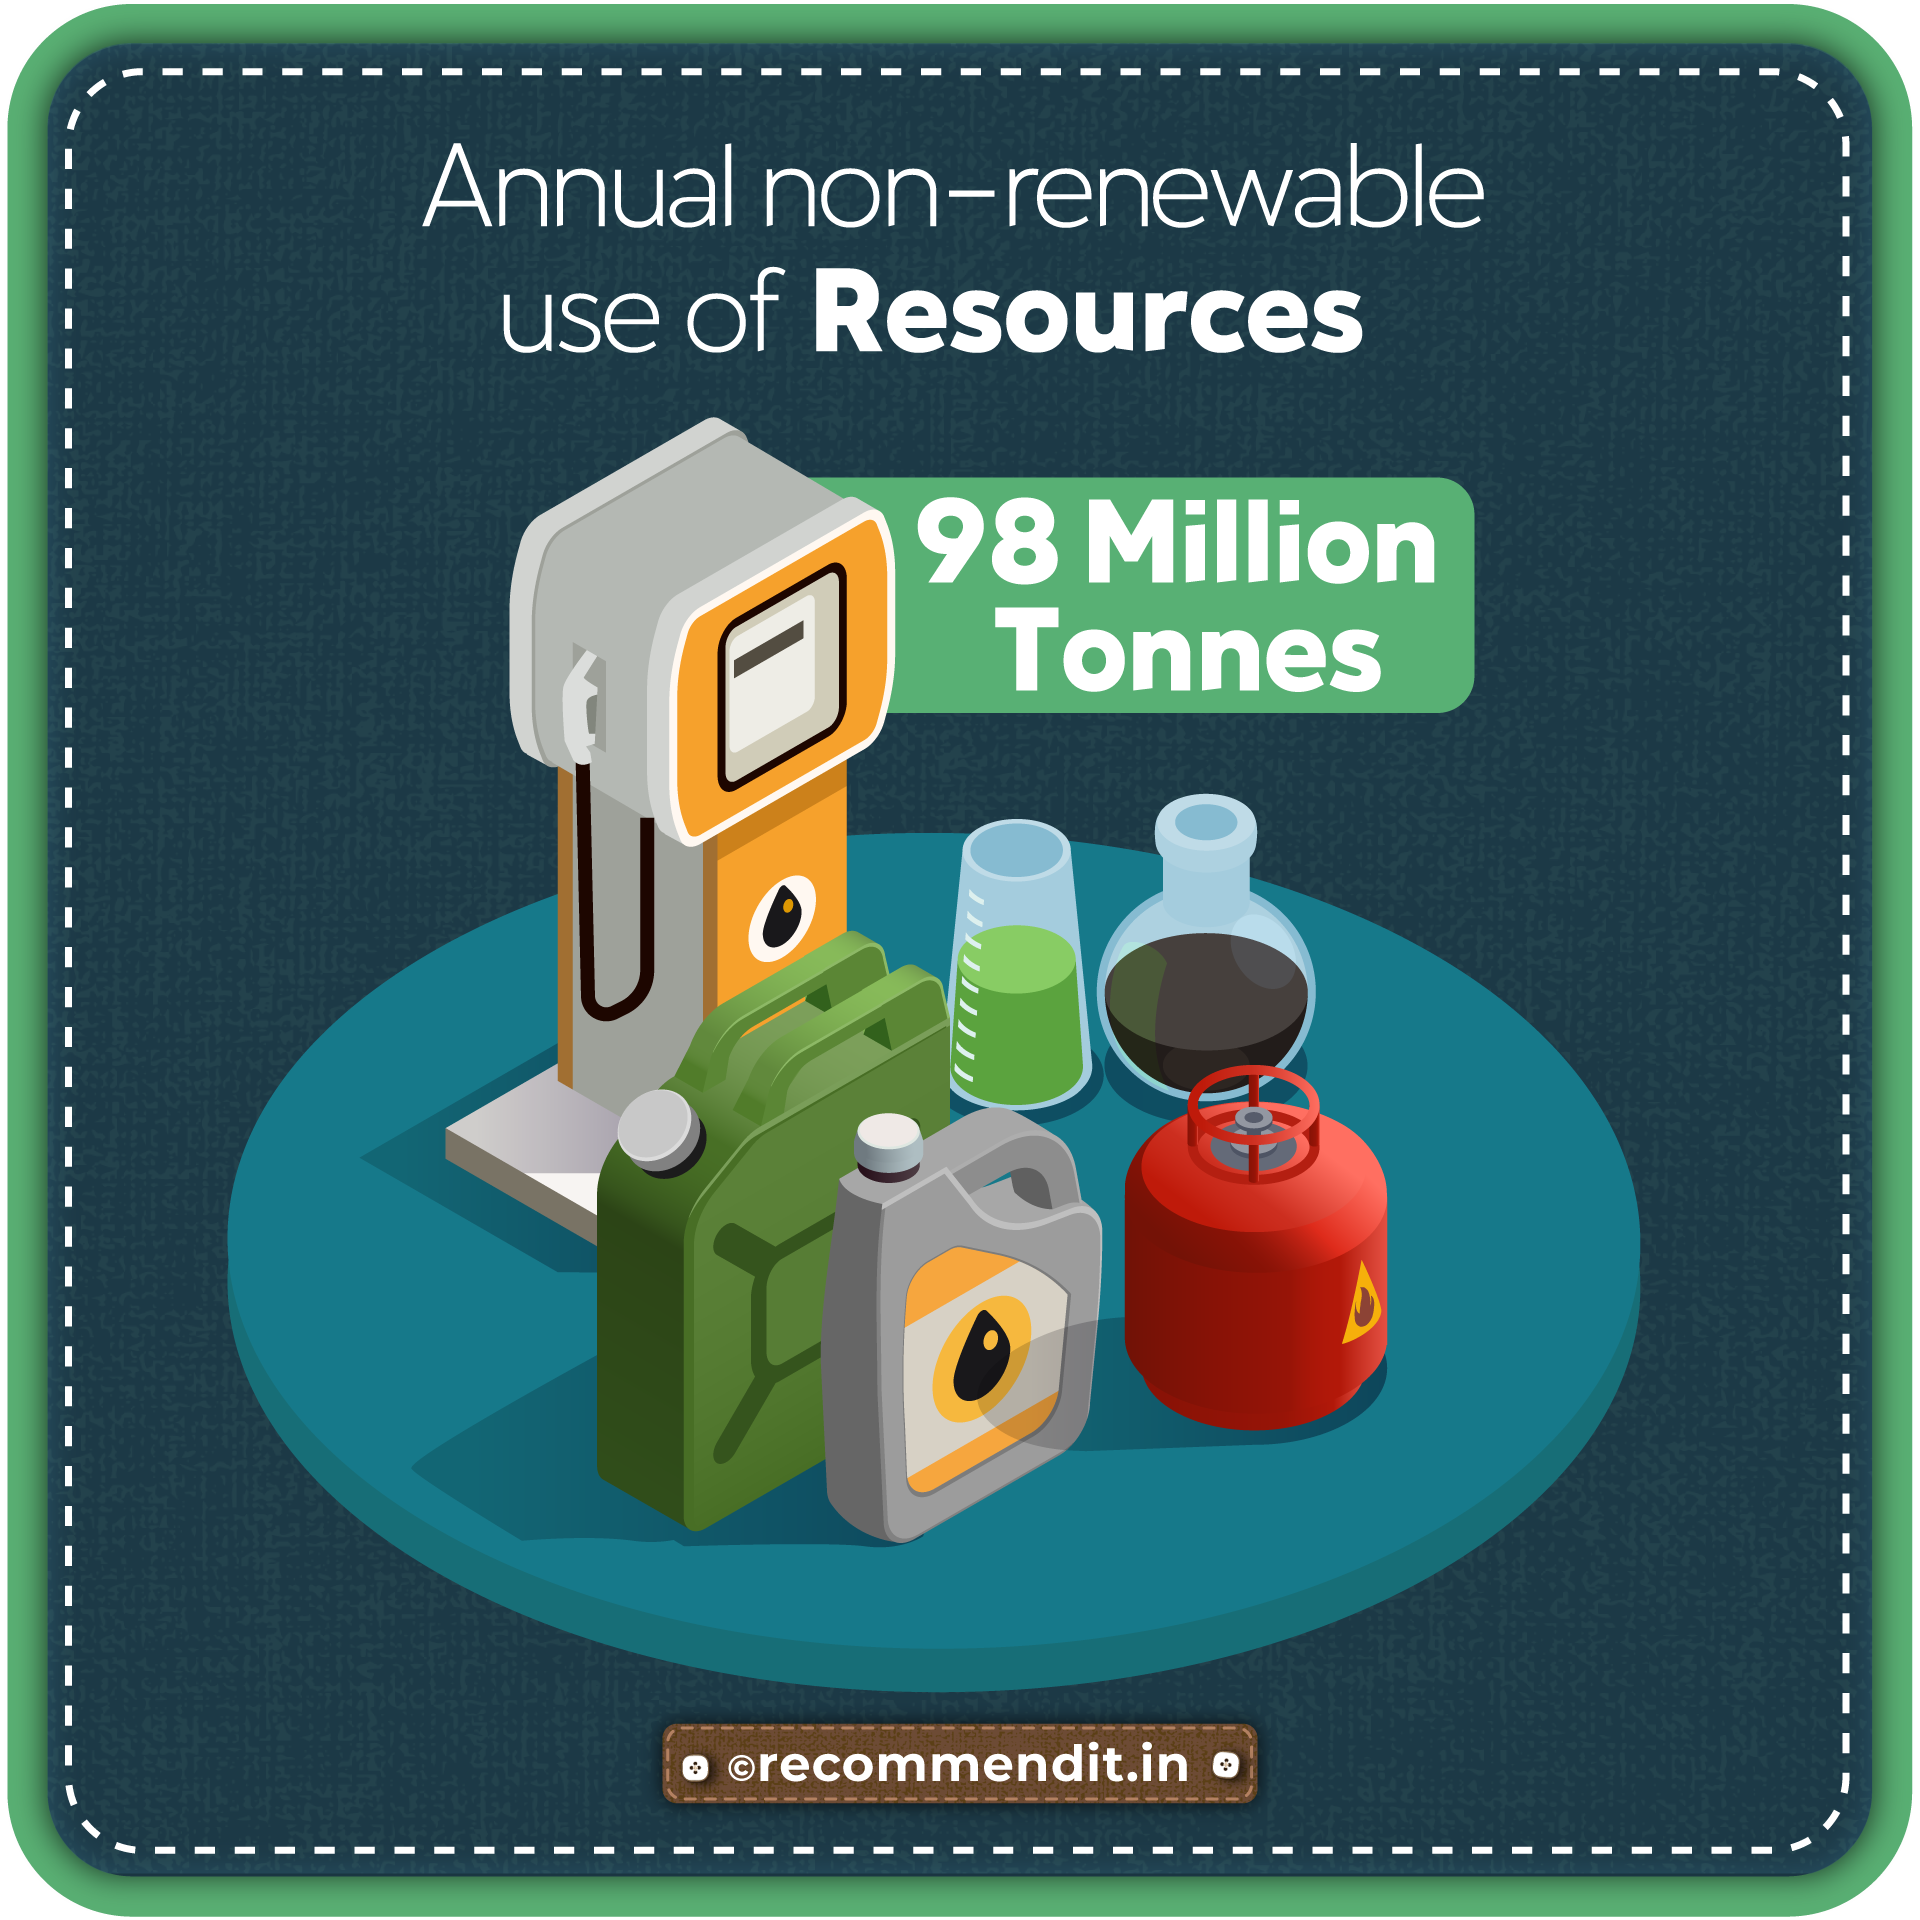 Use of non-renewable resources annually